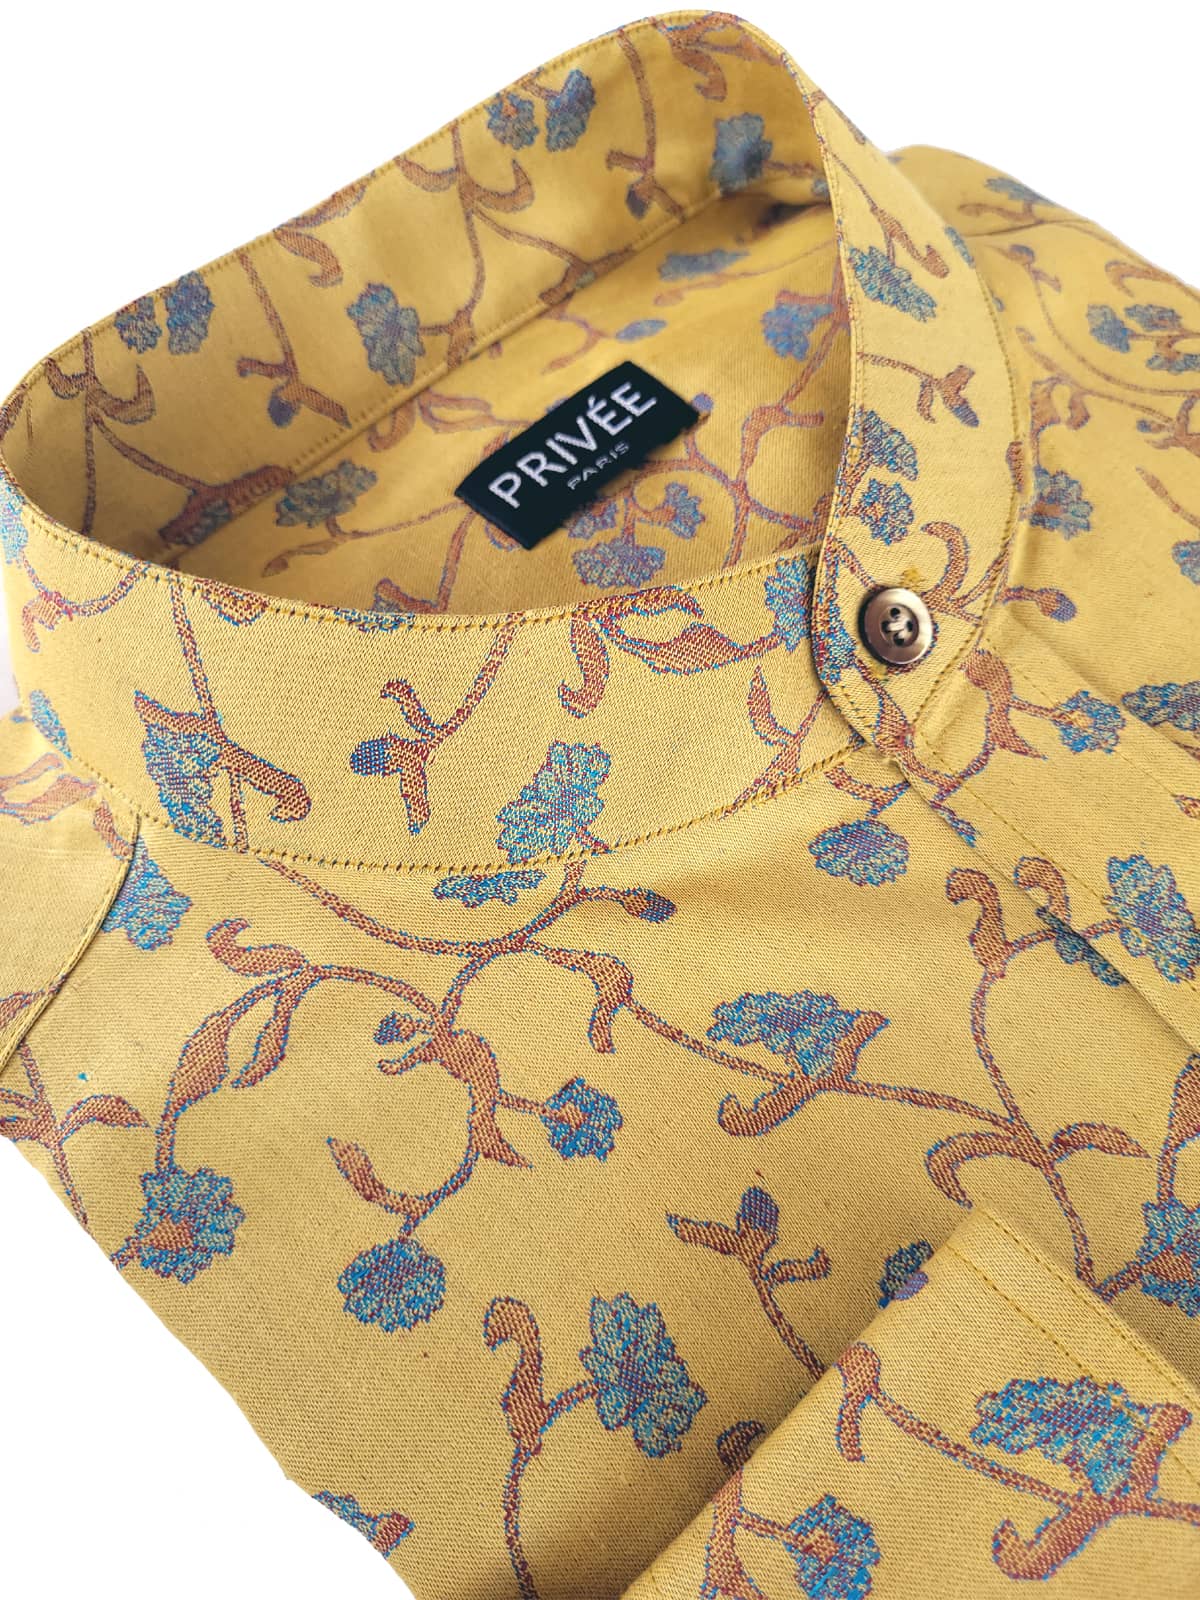 Royal Yellow Linen Luxury Shirt (Limited Edition)